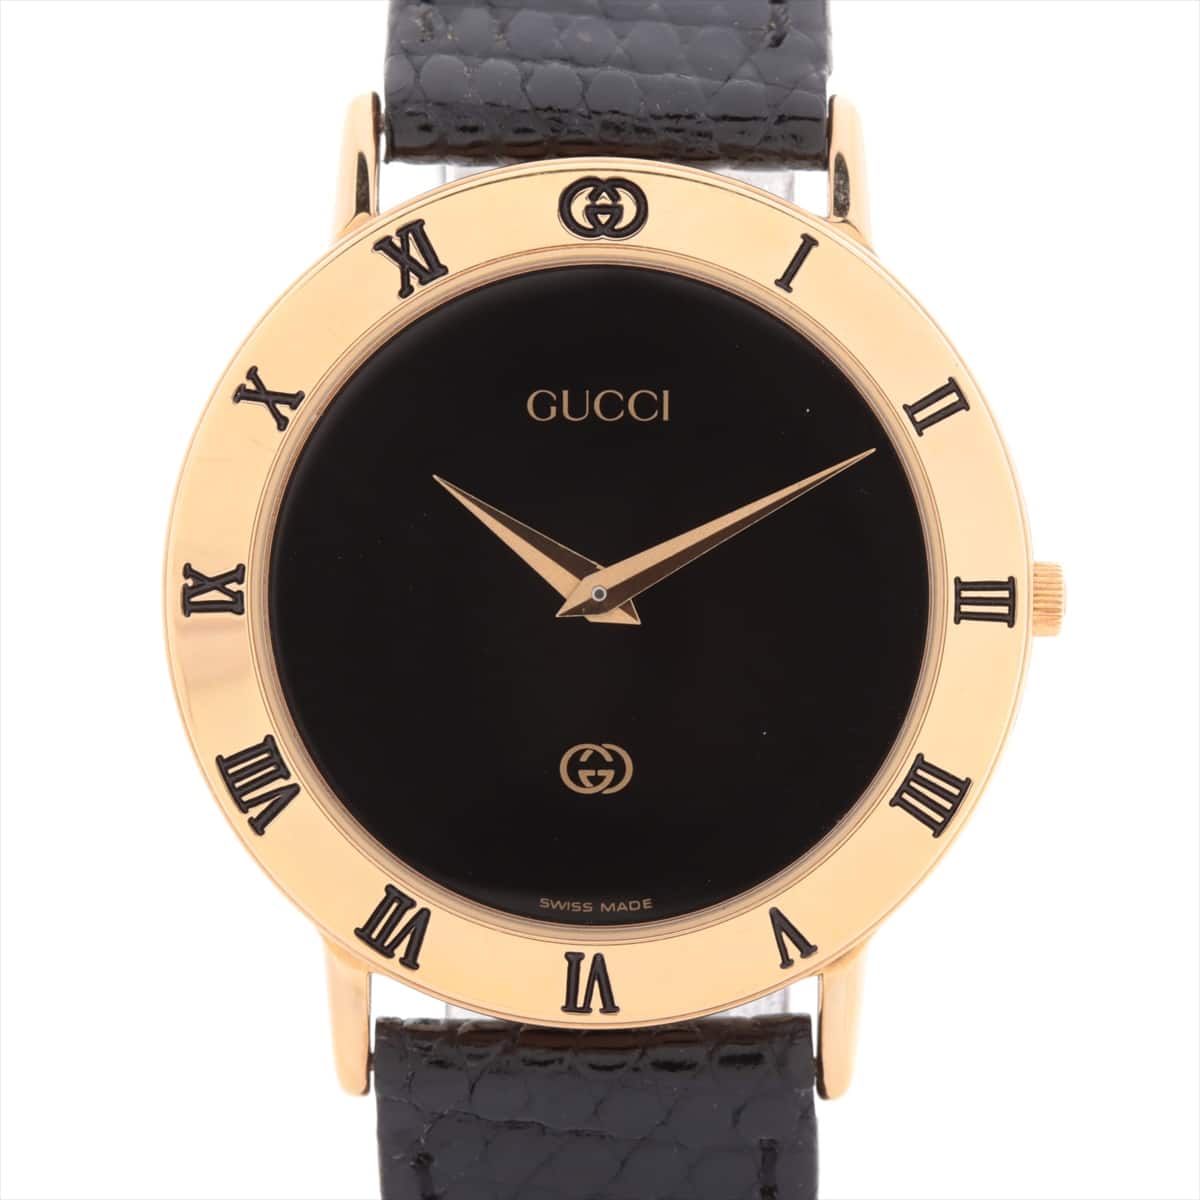 Gucci 3000M GP & Leather QZ Black-Face Inner box only